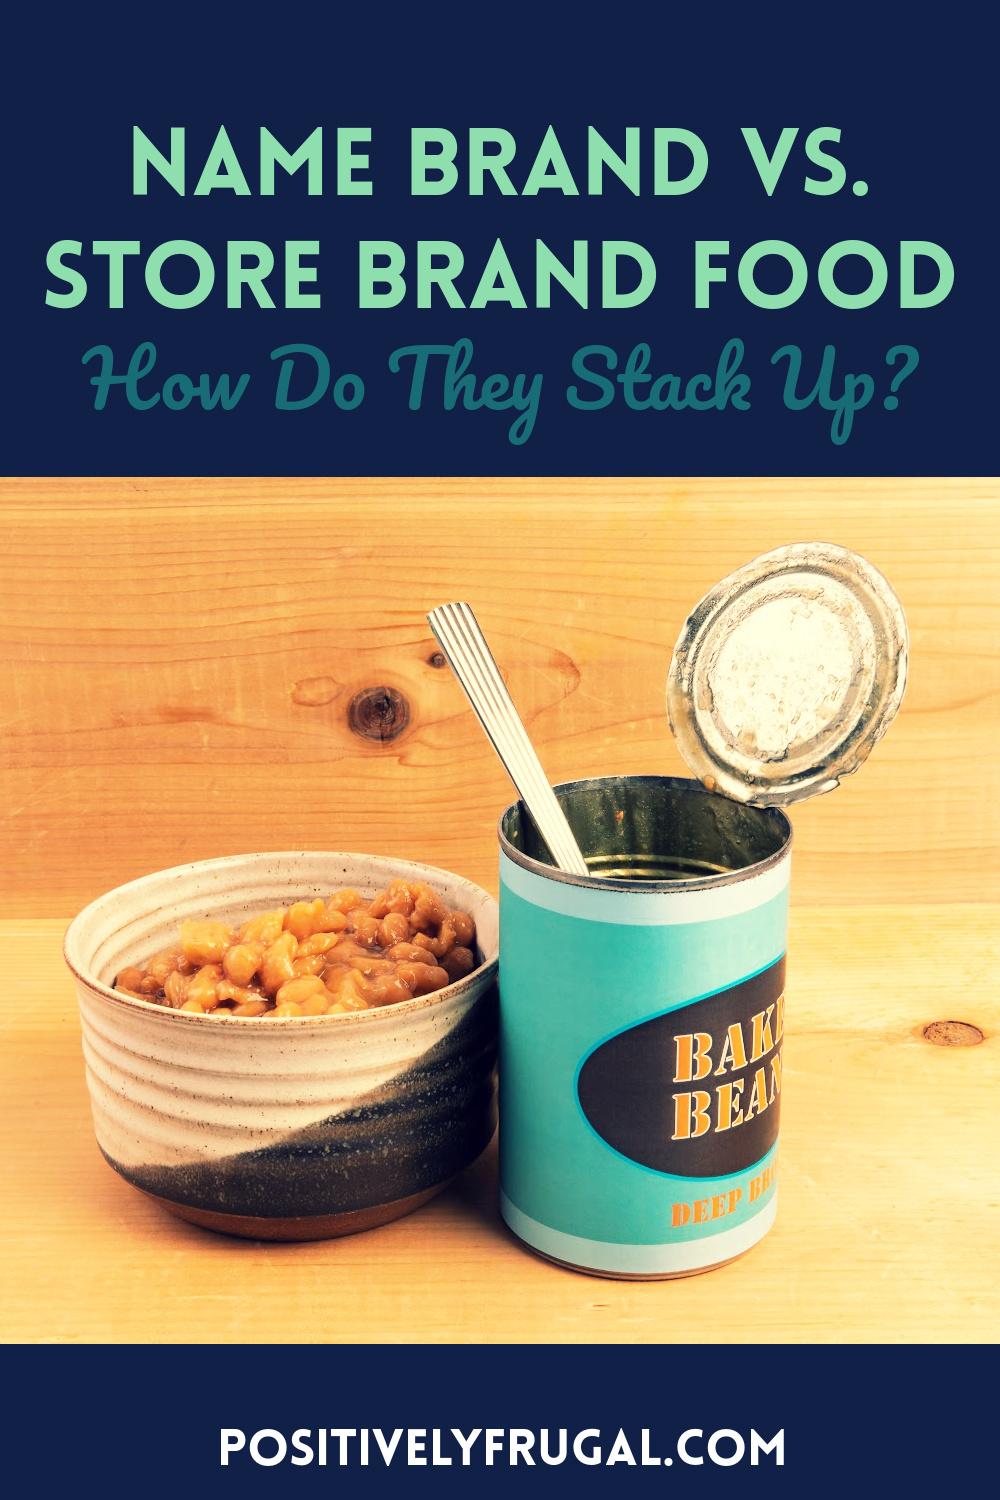 Name Brand vs. Store Brand Food by PositivelyFrugal.com